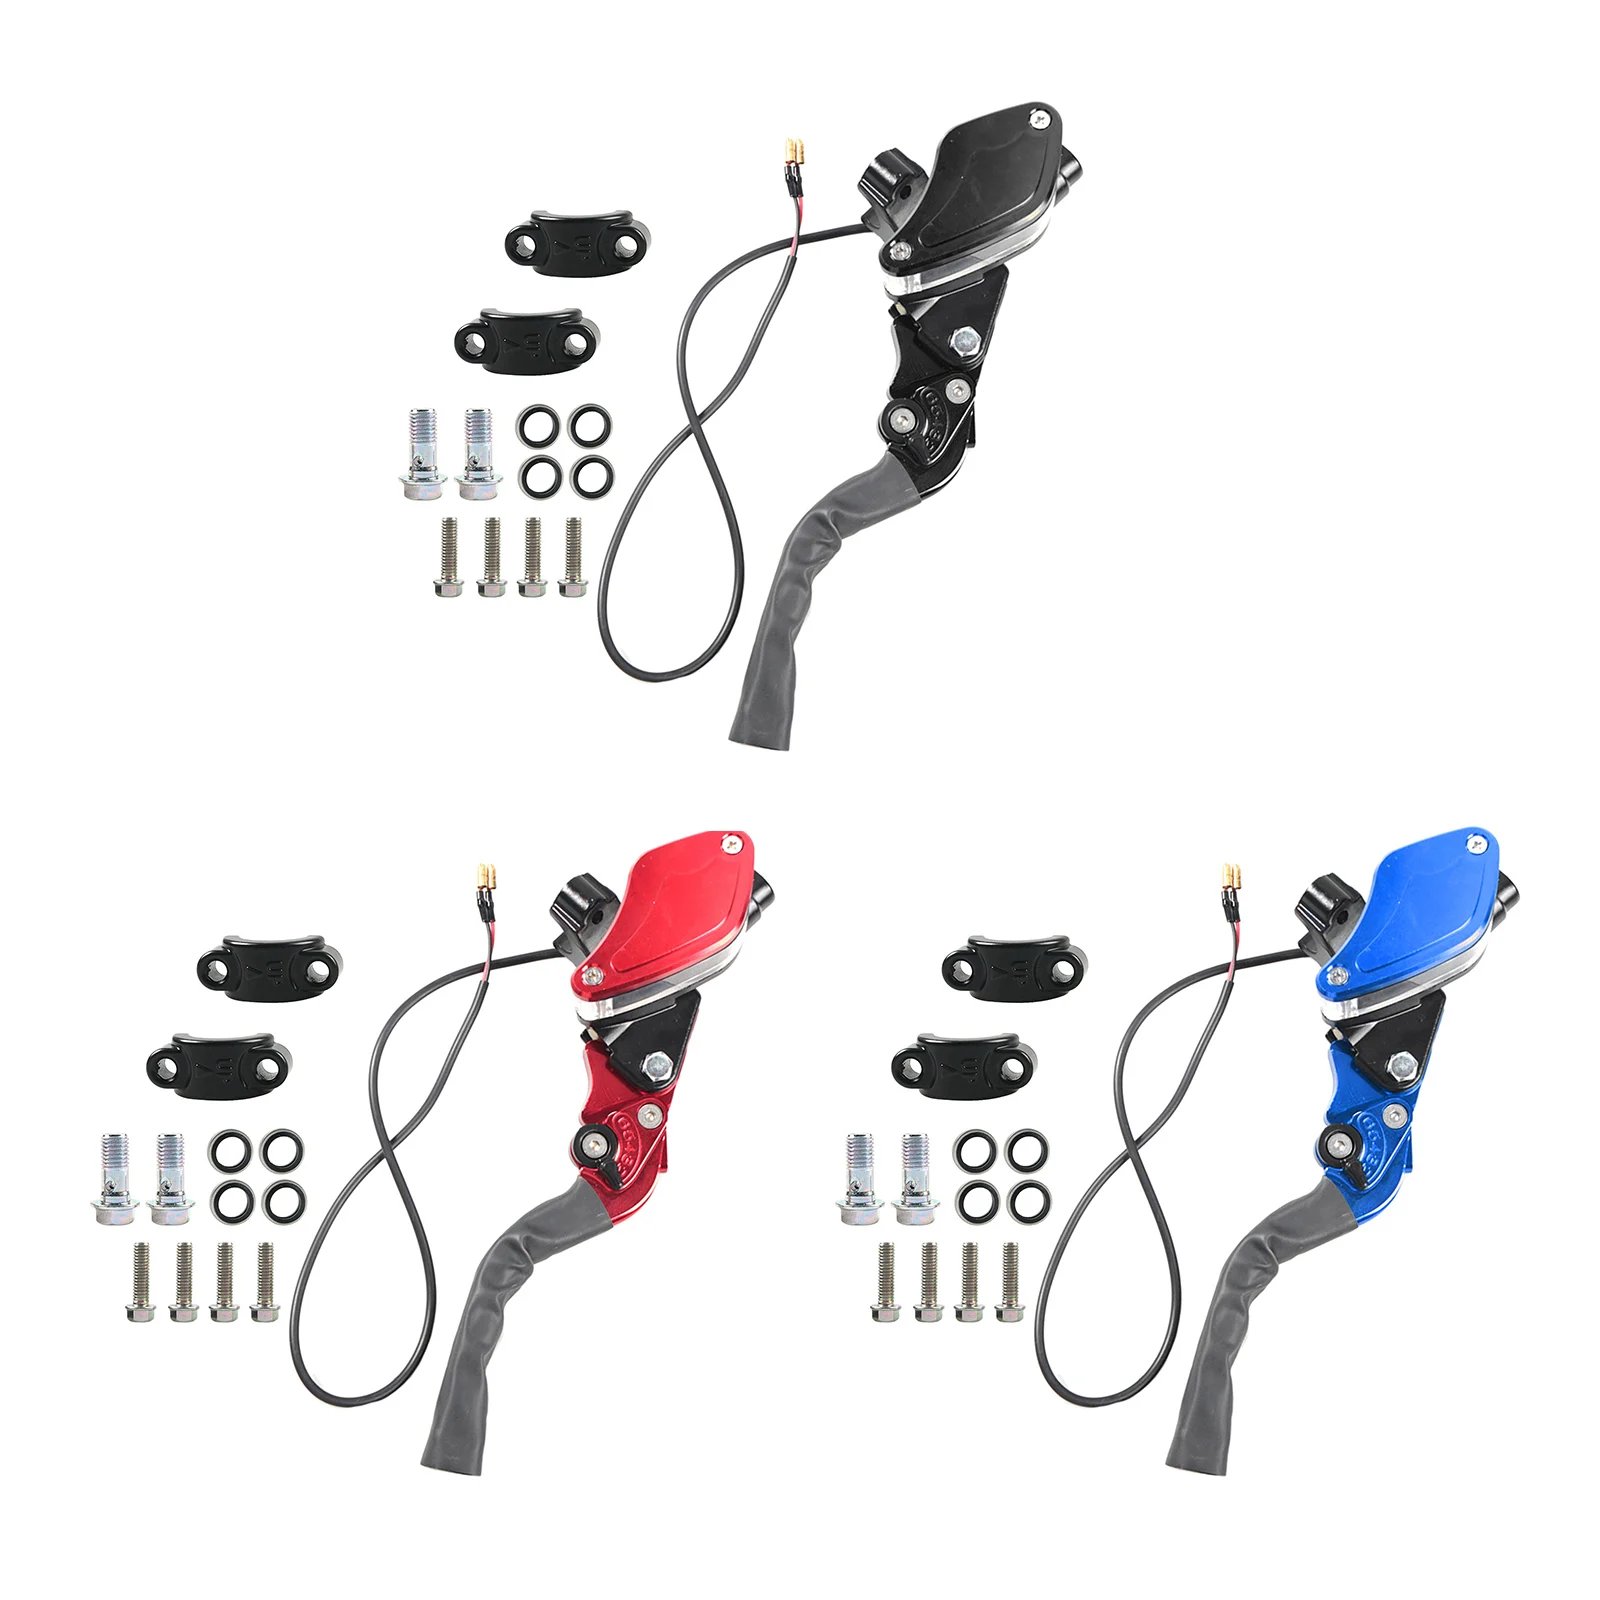 22mm Motorcycle Universal Hydraulic Brake and Clutch Lever Set Fit for 50cc-300cc Sport Bike Street Bike Scooter